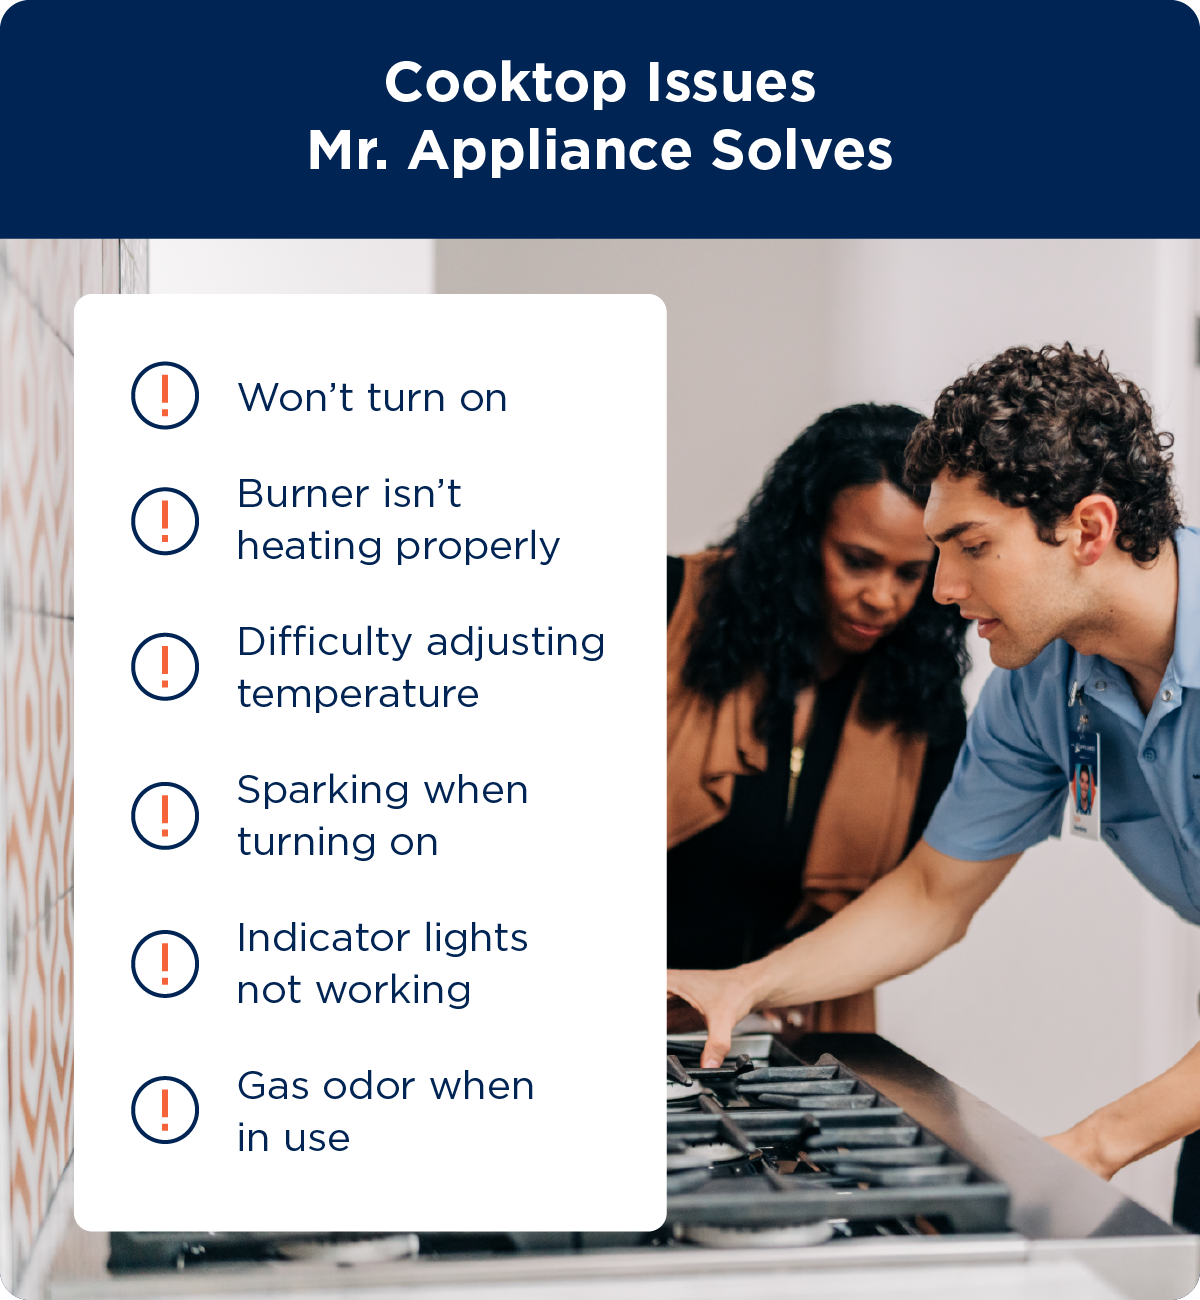 List of the cooktop problems Mr. Appliance solves: cooktop won’t turn on, burner isn’t heating properly, difficulty adjusting temperature, sparking when turning on, indicator lights not working, and gas odor when in use.